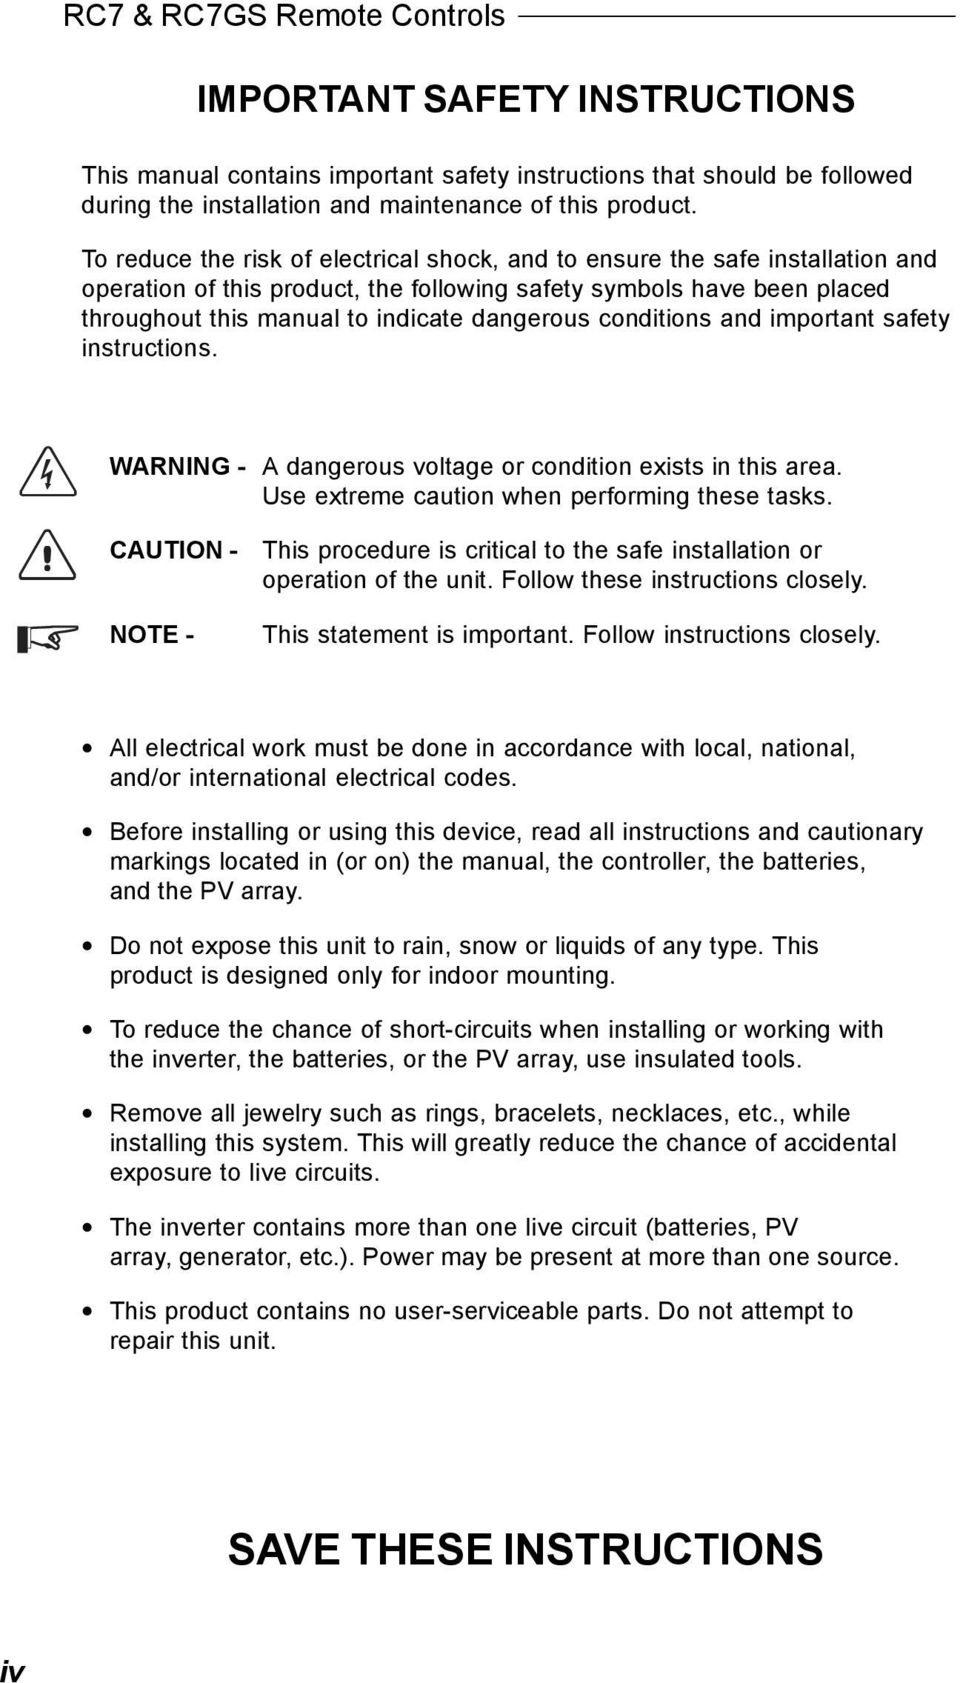 conditions and important safety instructions. WARNING - A dangerous voltage or condition exists in this area. Use extreme caution when performing these tasks.